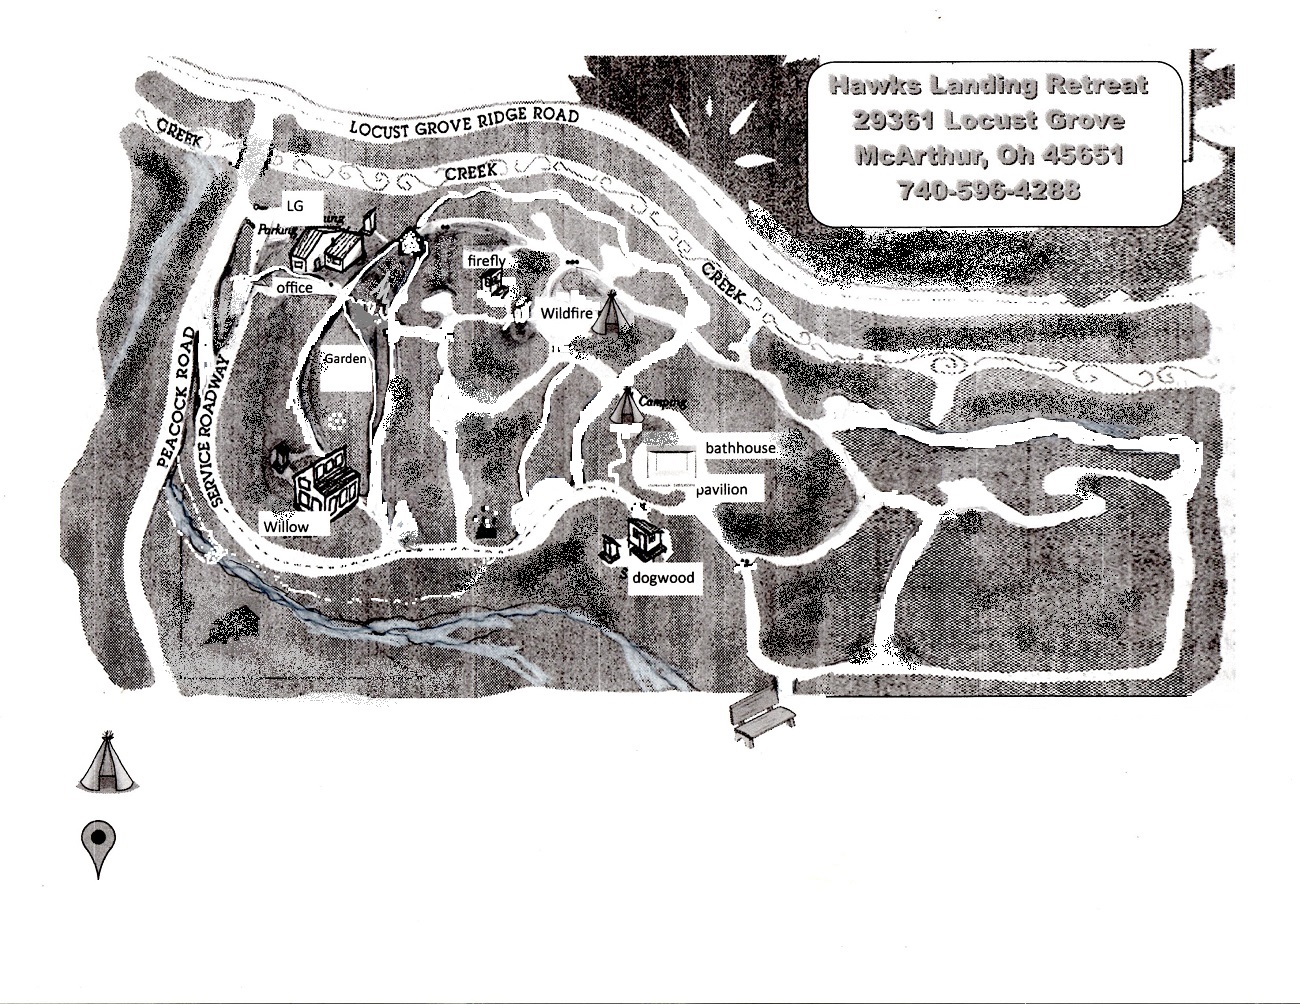 Hawks Landing Retreat Center - Overview Map w/trails and 50 acre view